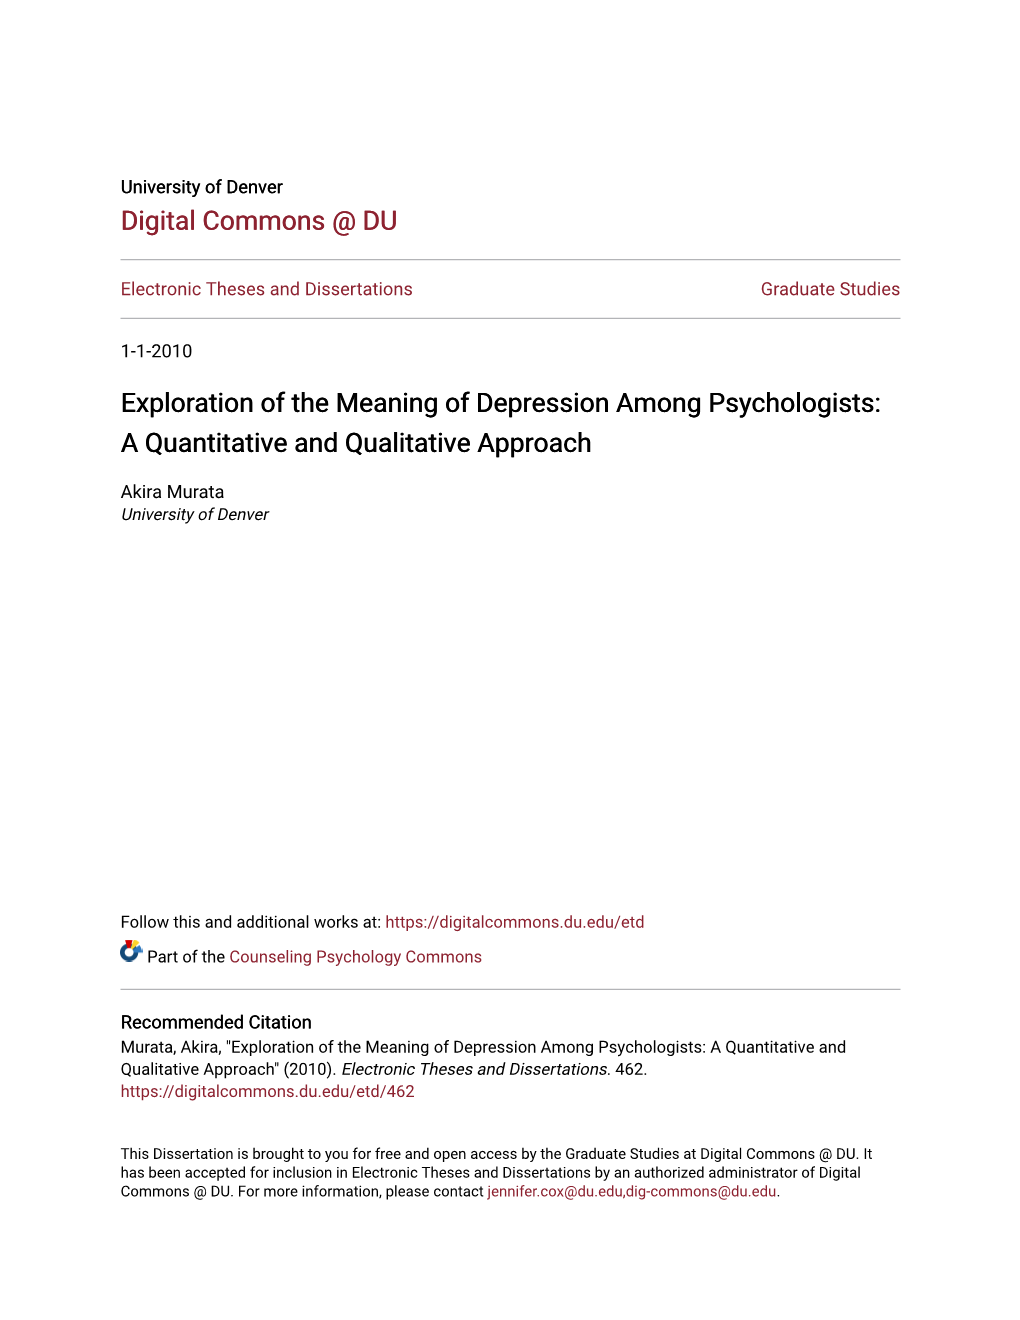 Exploration of the Meaning of Depression Among Psychologists: a Quantitative and Qualitative Approach